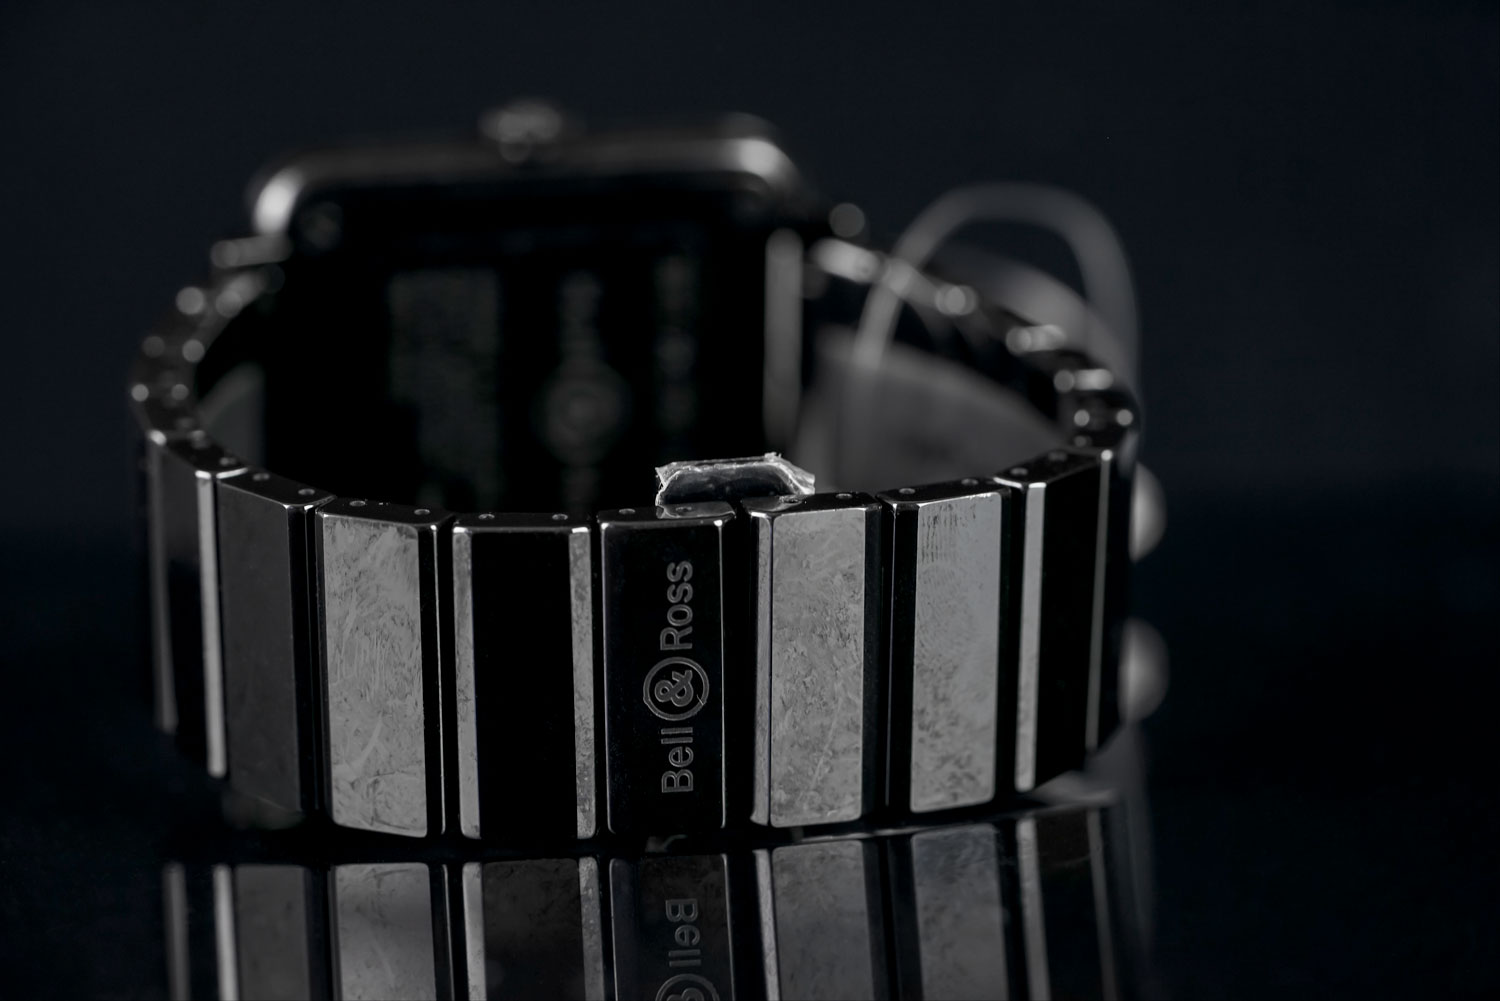 GENTLEMEN'S BELL & ROSS PHANTOM BRS-98-PBC 02308, square, black hands and dial , non date, 39mm - Image 2 of 3